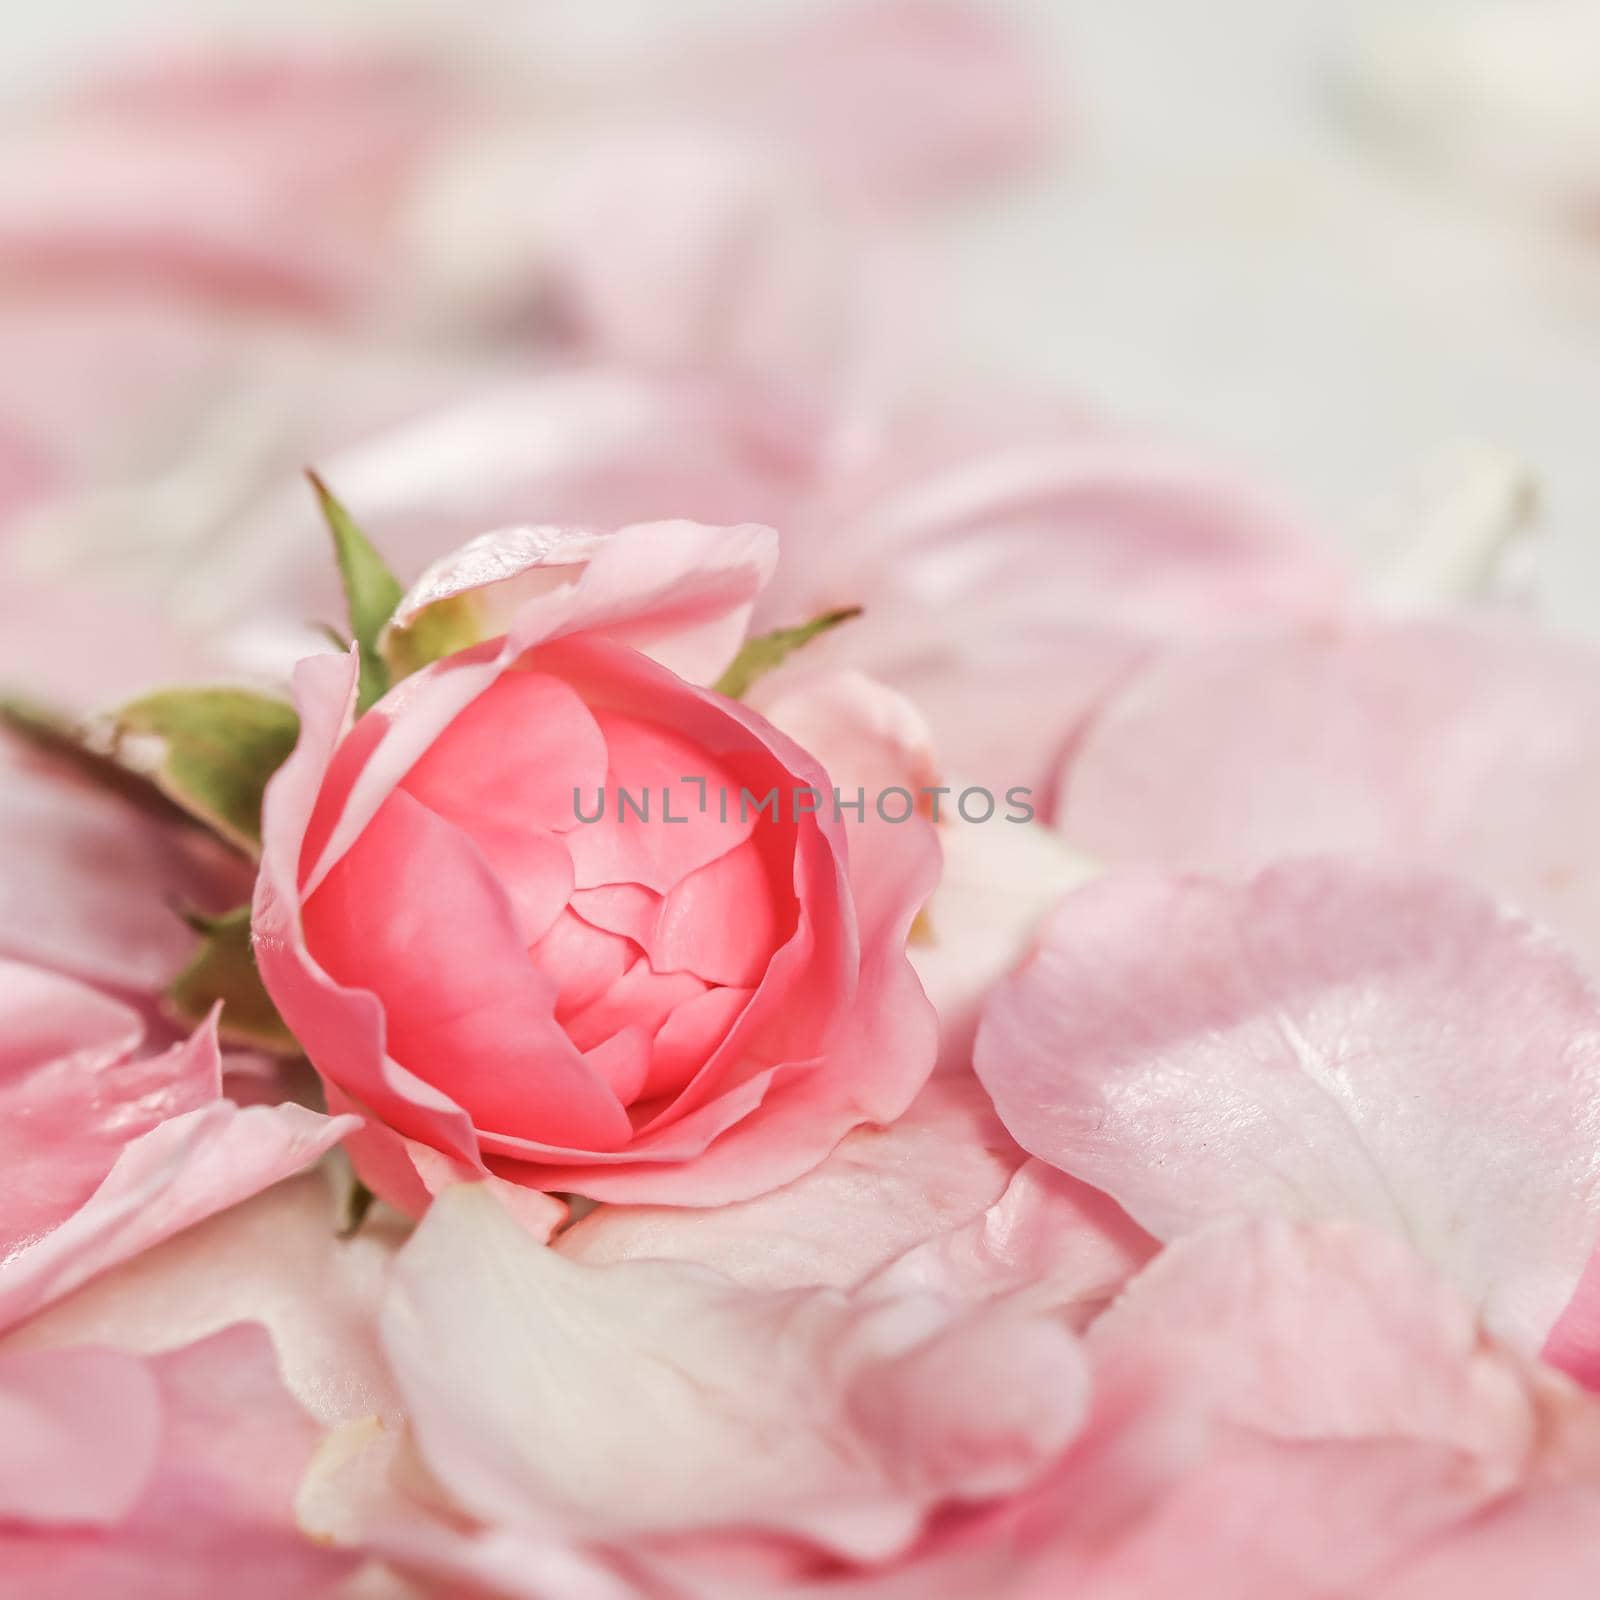 Botanical concept, invitation card - Soft focus, abstract floral background, bud of pink rose flower. Macro flowers backdrop for holiday brand design